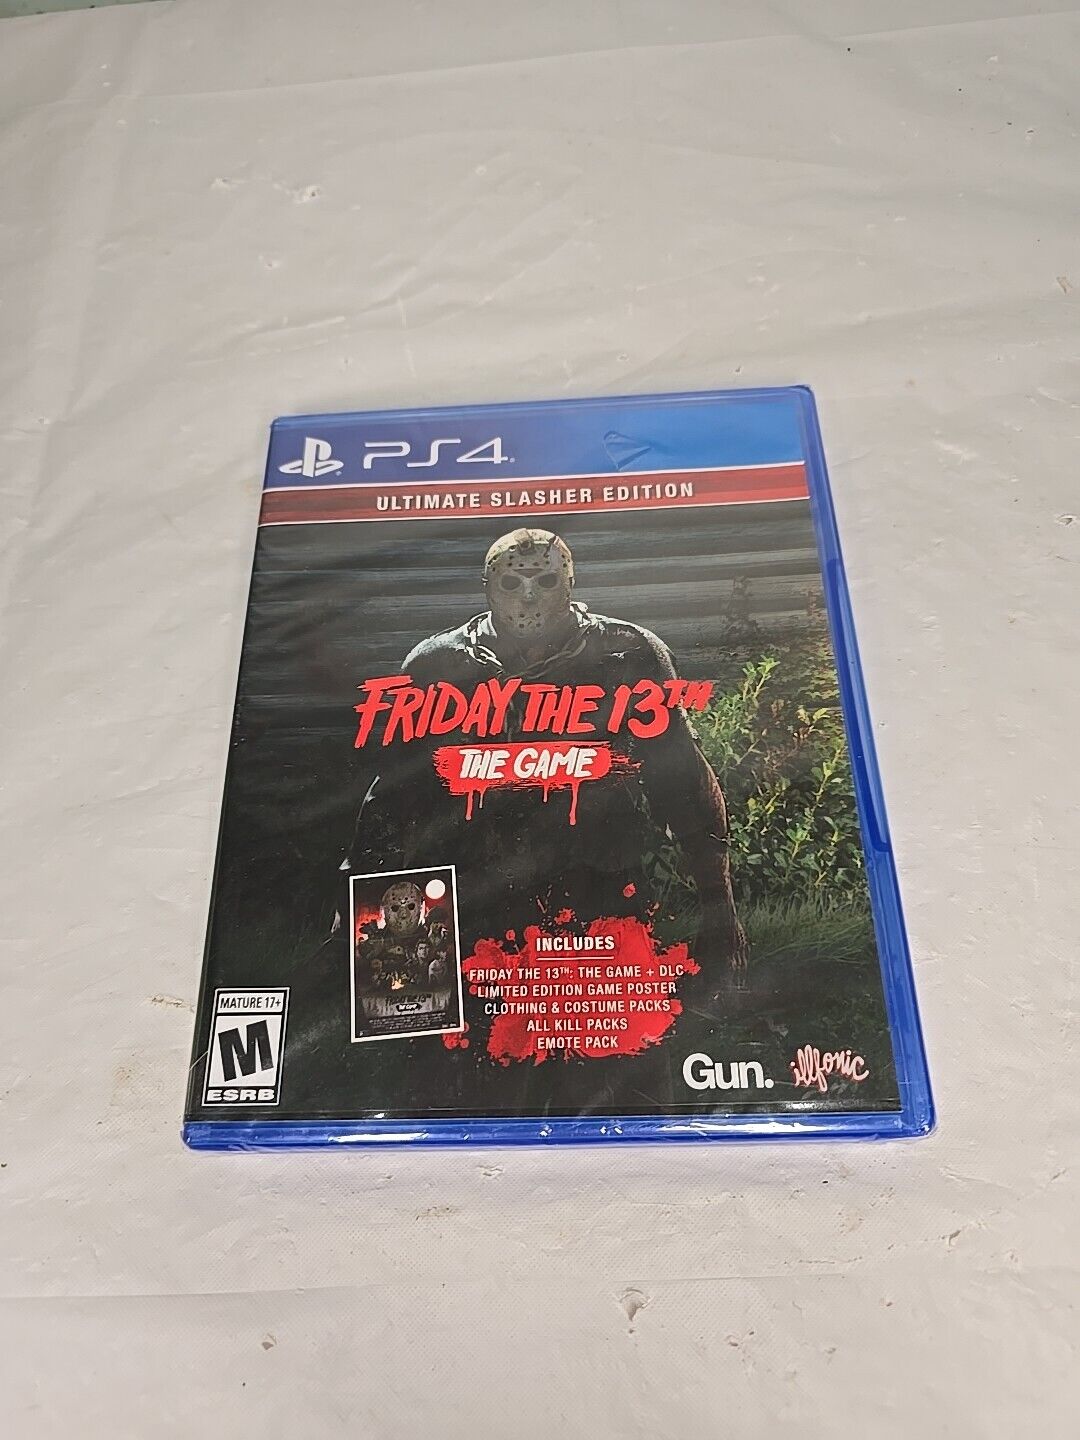 Friday the 13th: The Game - Ultimate Slasher Edition  - Sony PlayStation 4